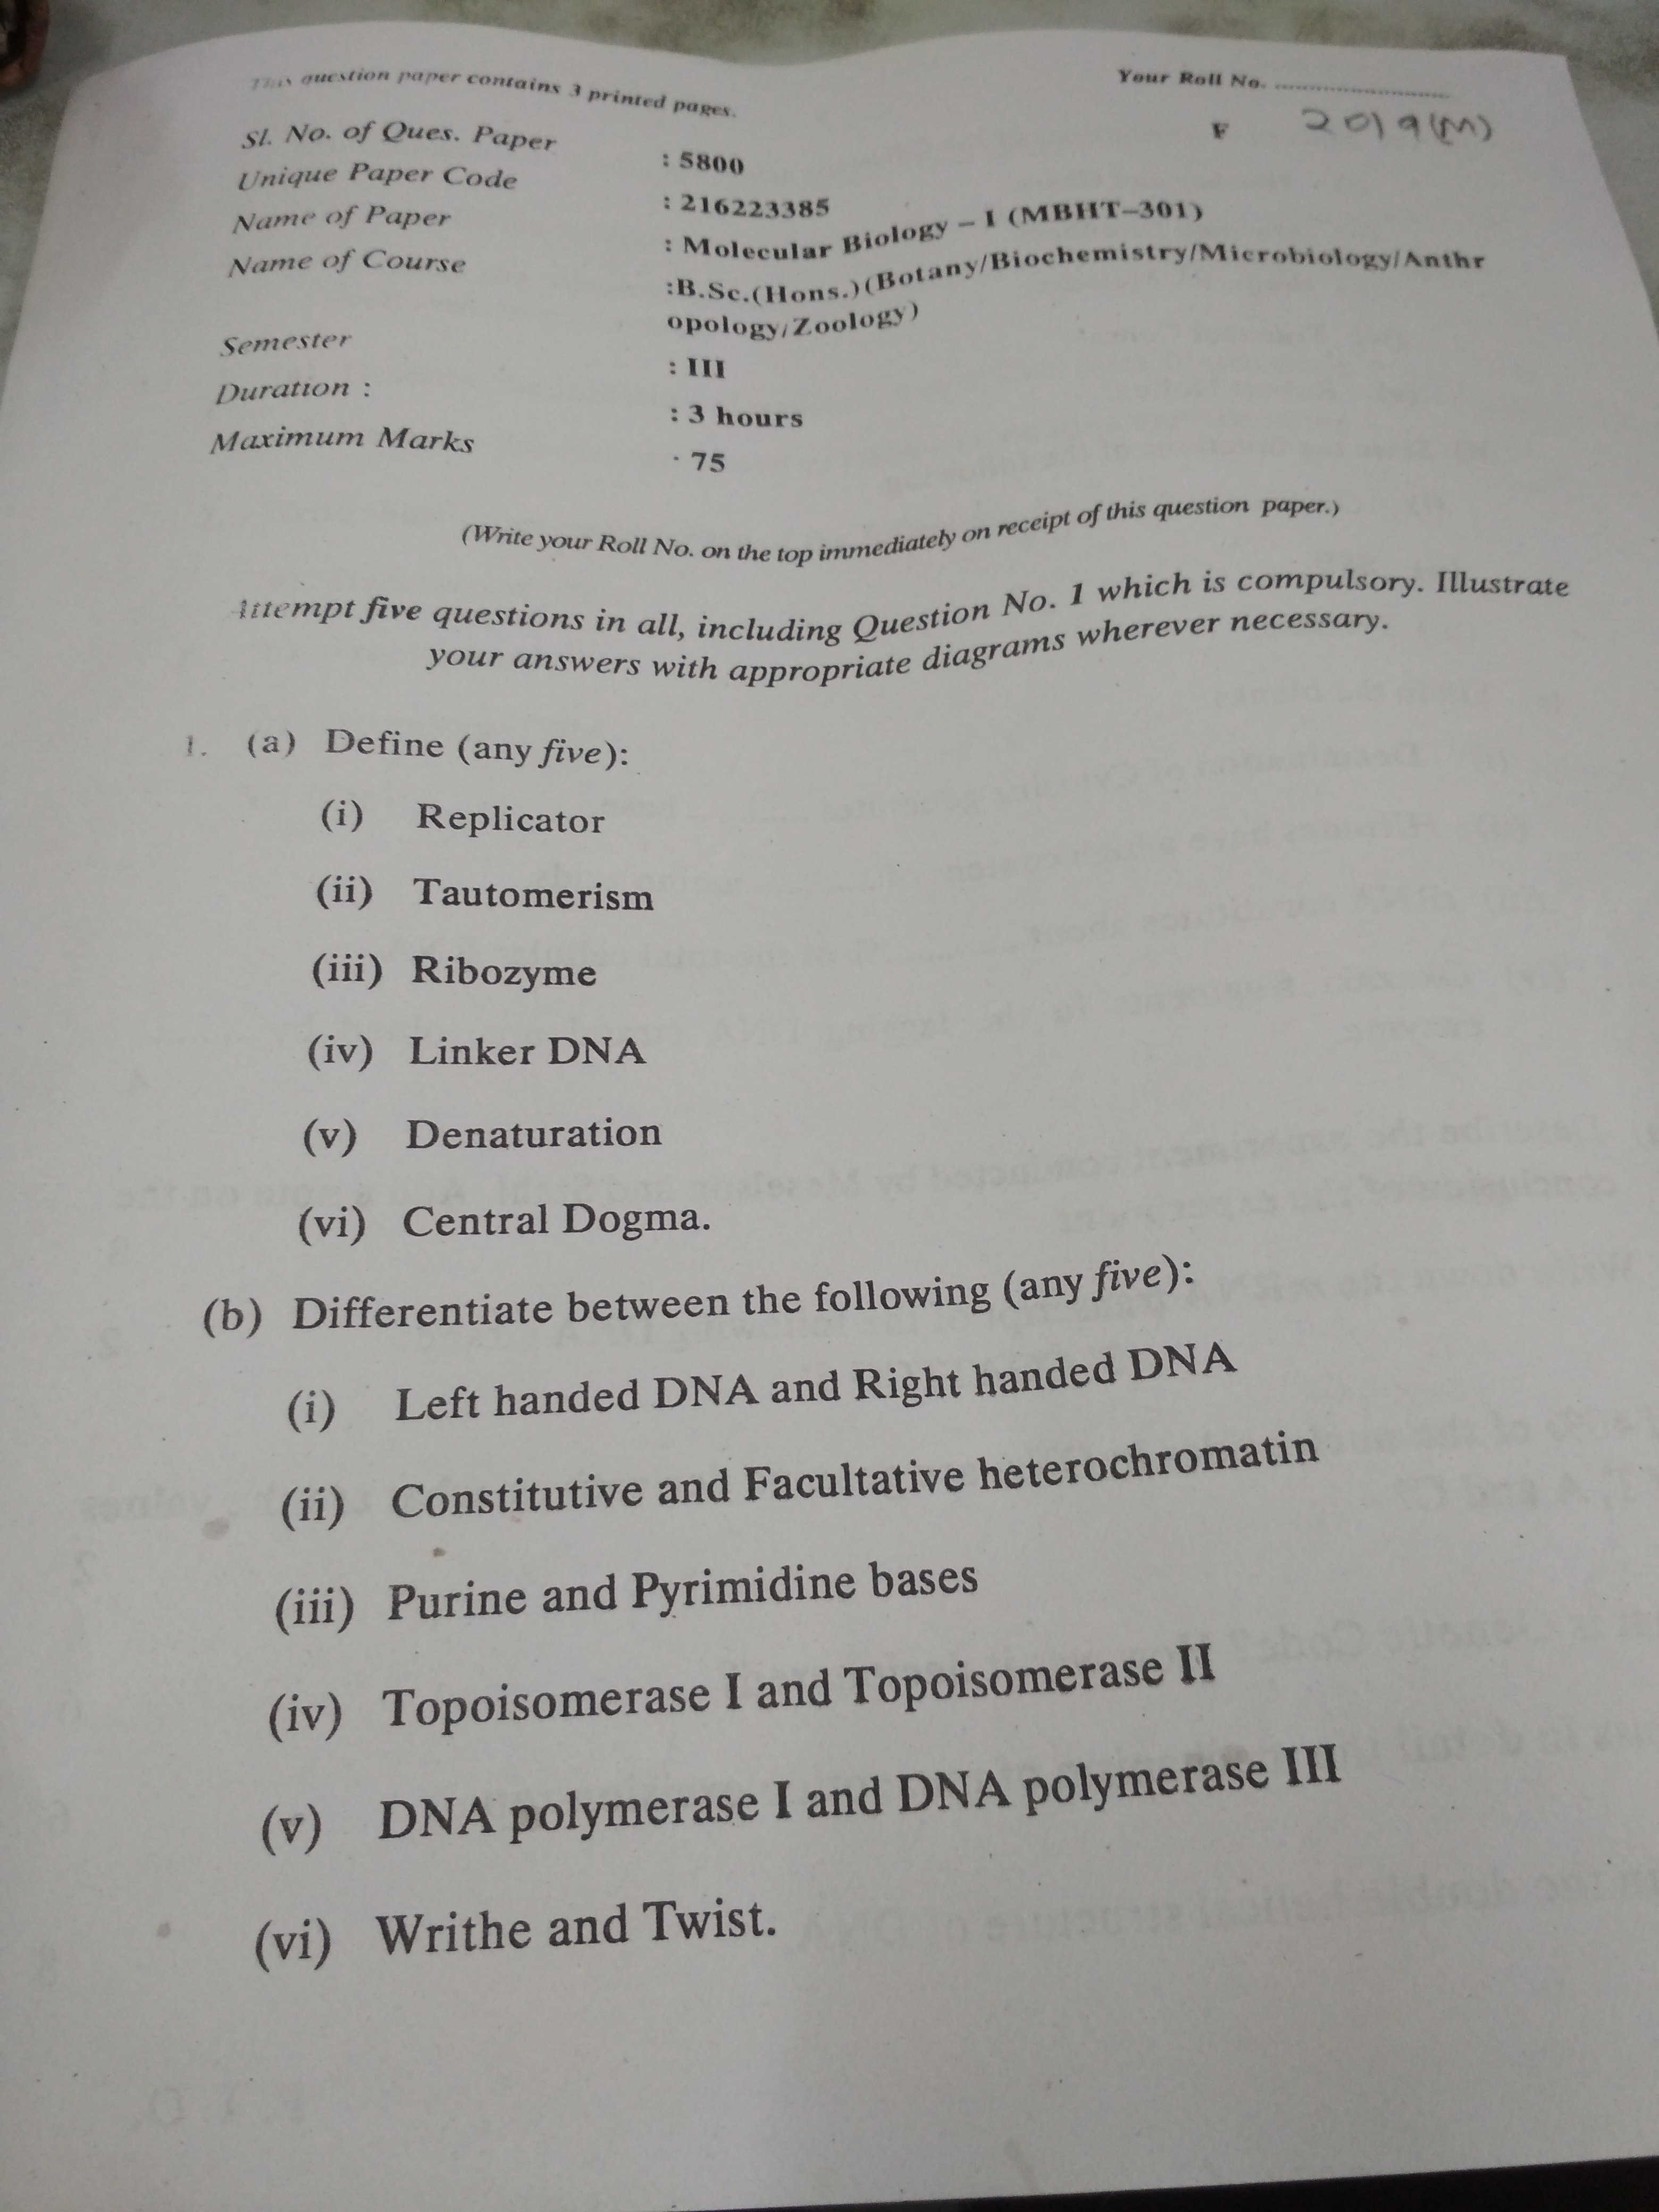 Zoology question paper-15643889964572059289178.jpg